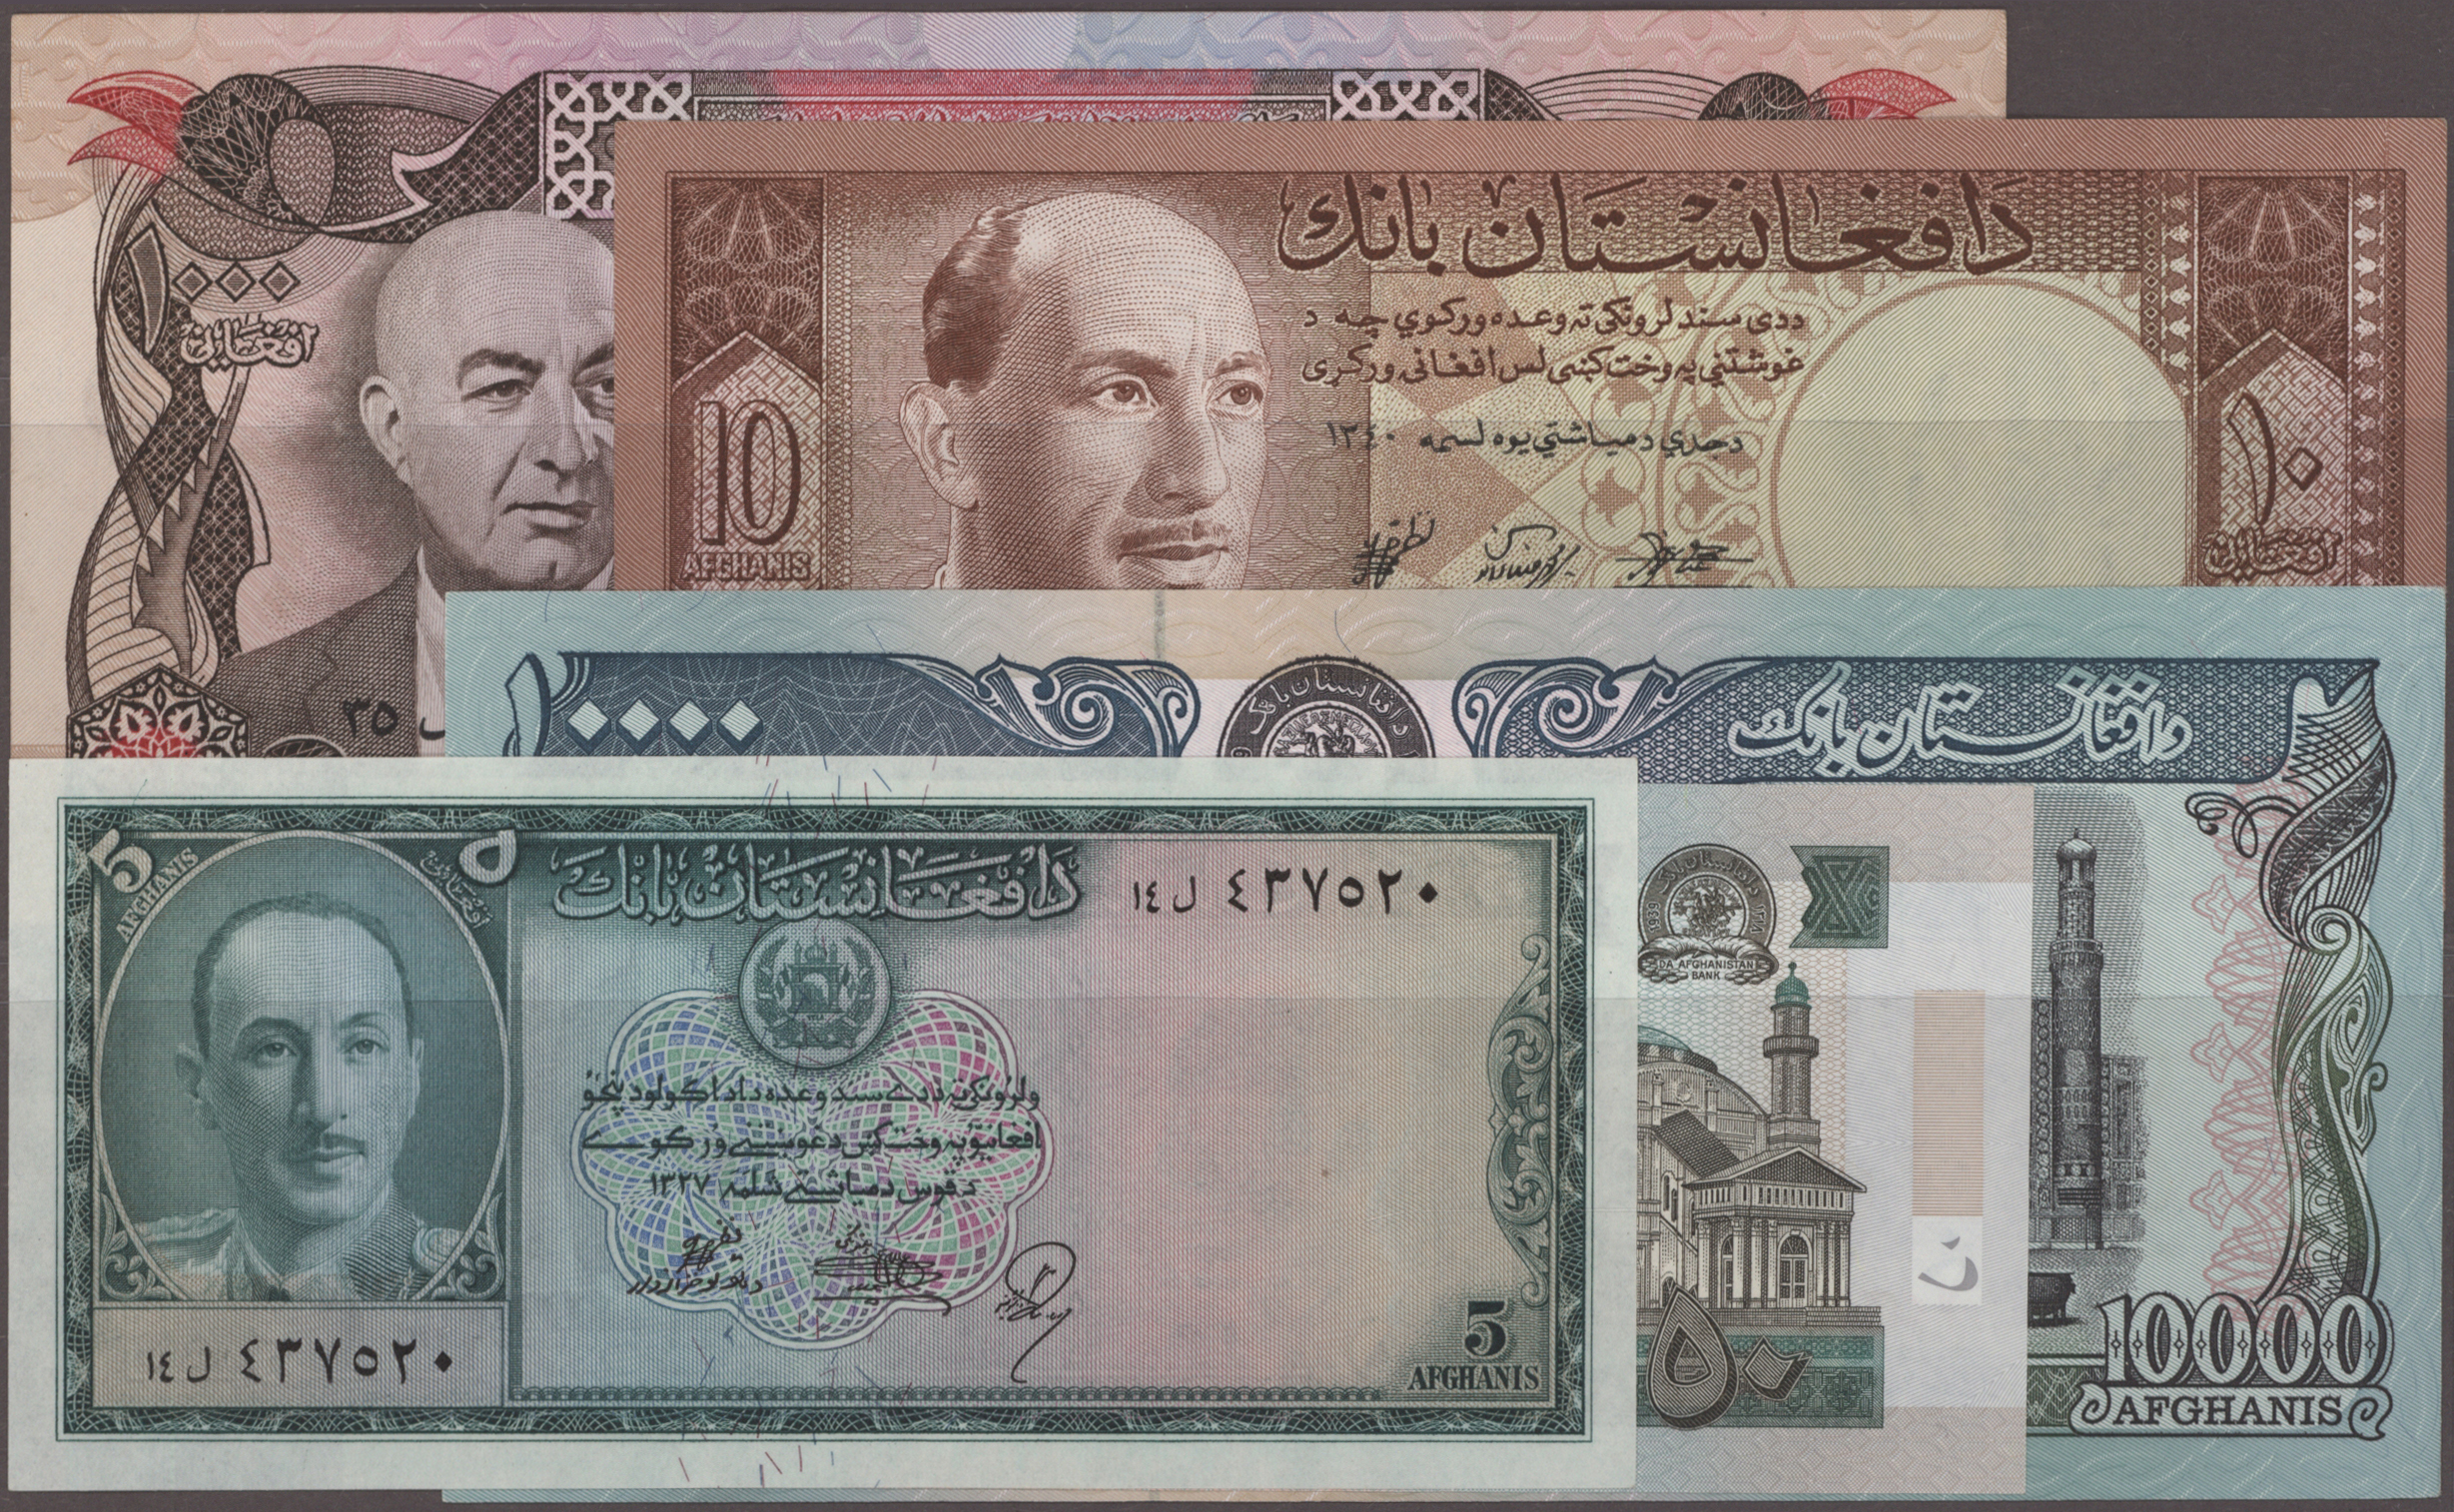 Lot 500 - Afghanistan | Banknoten  -  Auktionshaus Christoph Gärtner GmbH & Co. KG 52nd Auction - Day 1